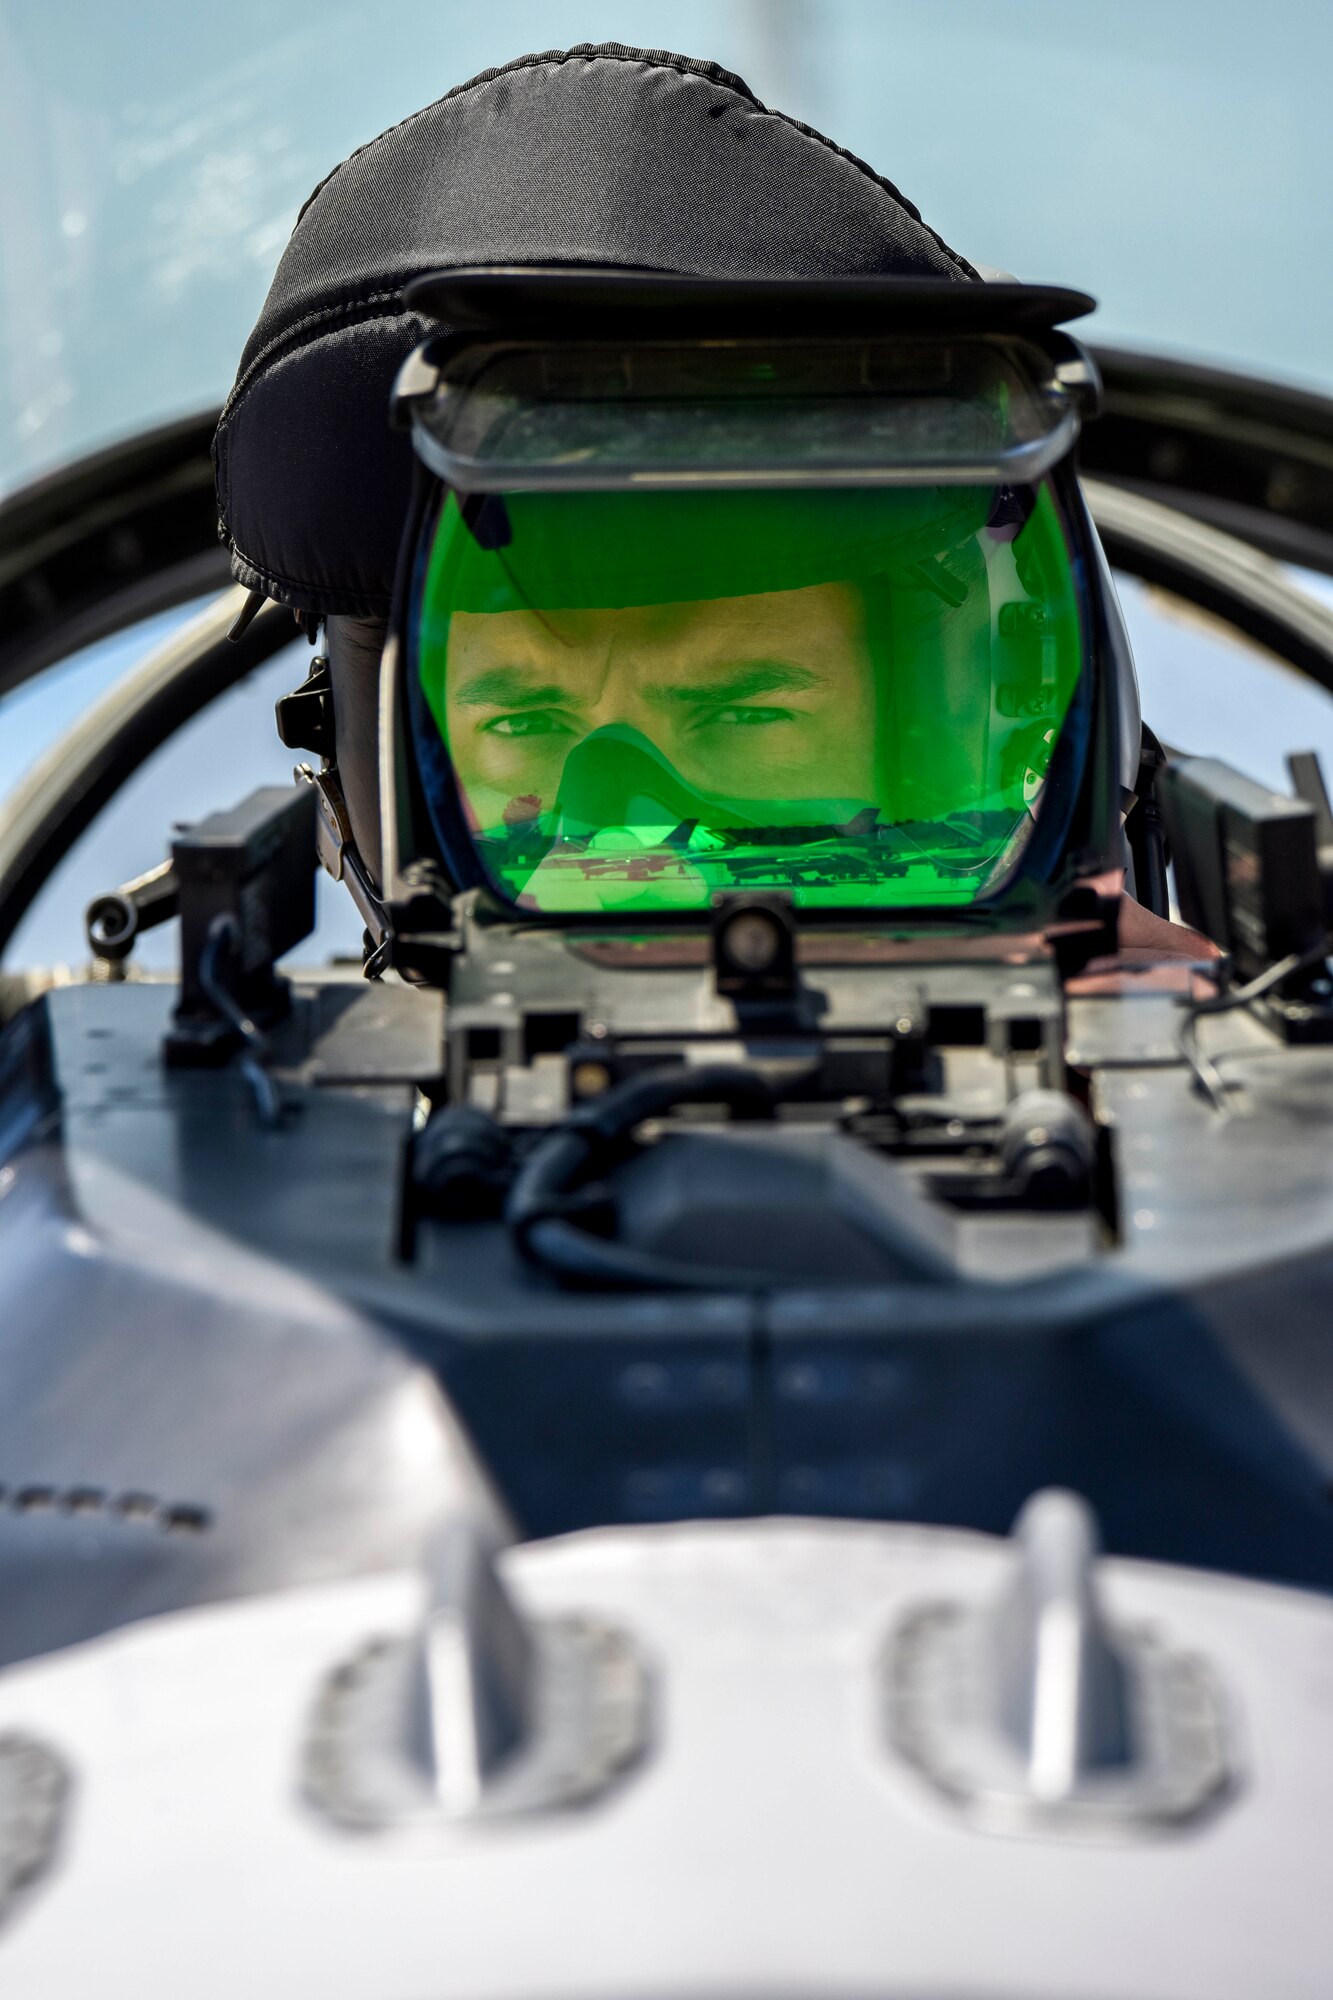 U.S. Air Force 1st Lt. T.J. Copic, an F-16 fighter pilot assigned to the Ohio National Guard’s 180th Fighter Wing, prepares for a training flight in an F-16 Fighting Falcon at the 180FW in Swanton, Ohio, June 30, 2020.